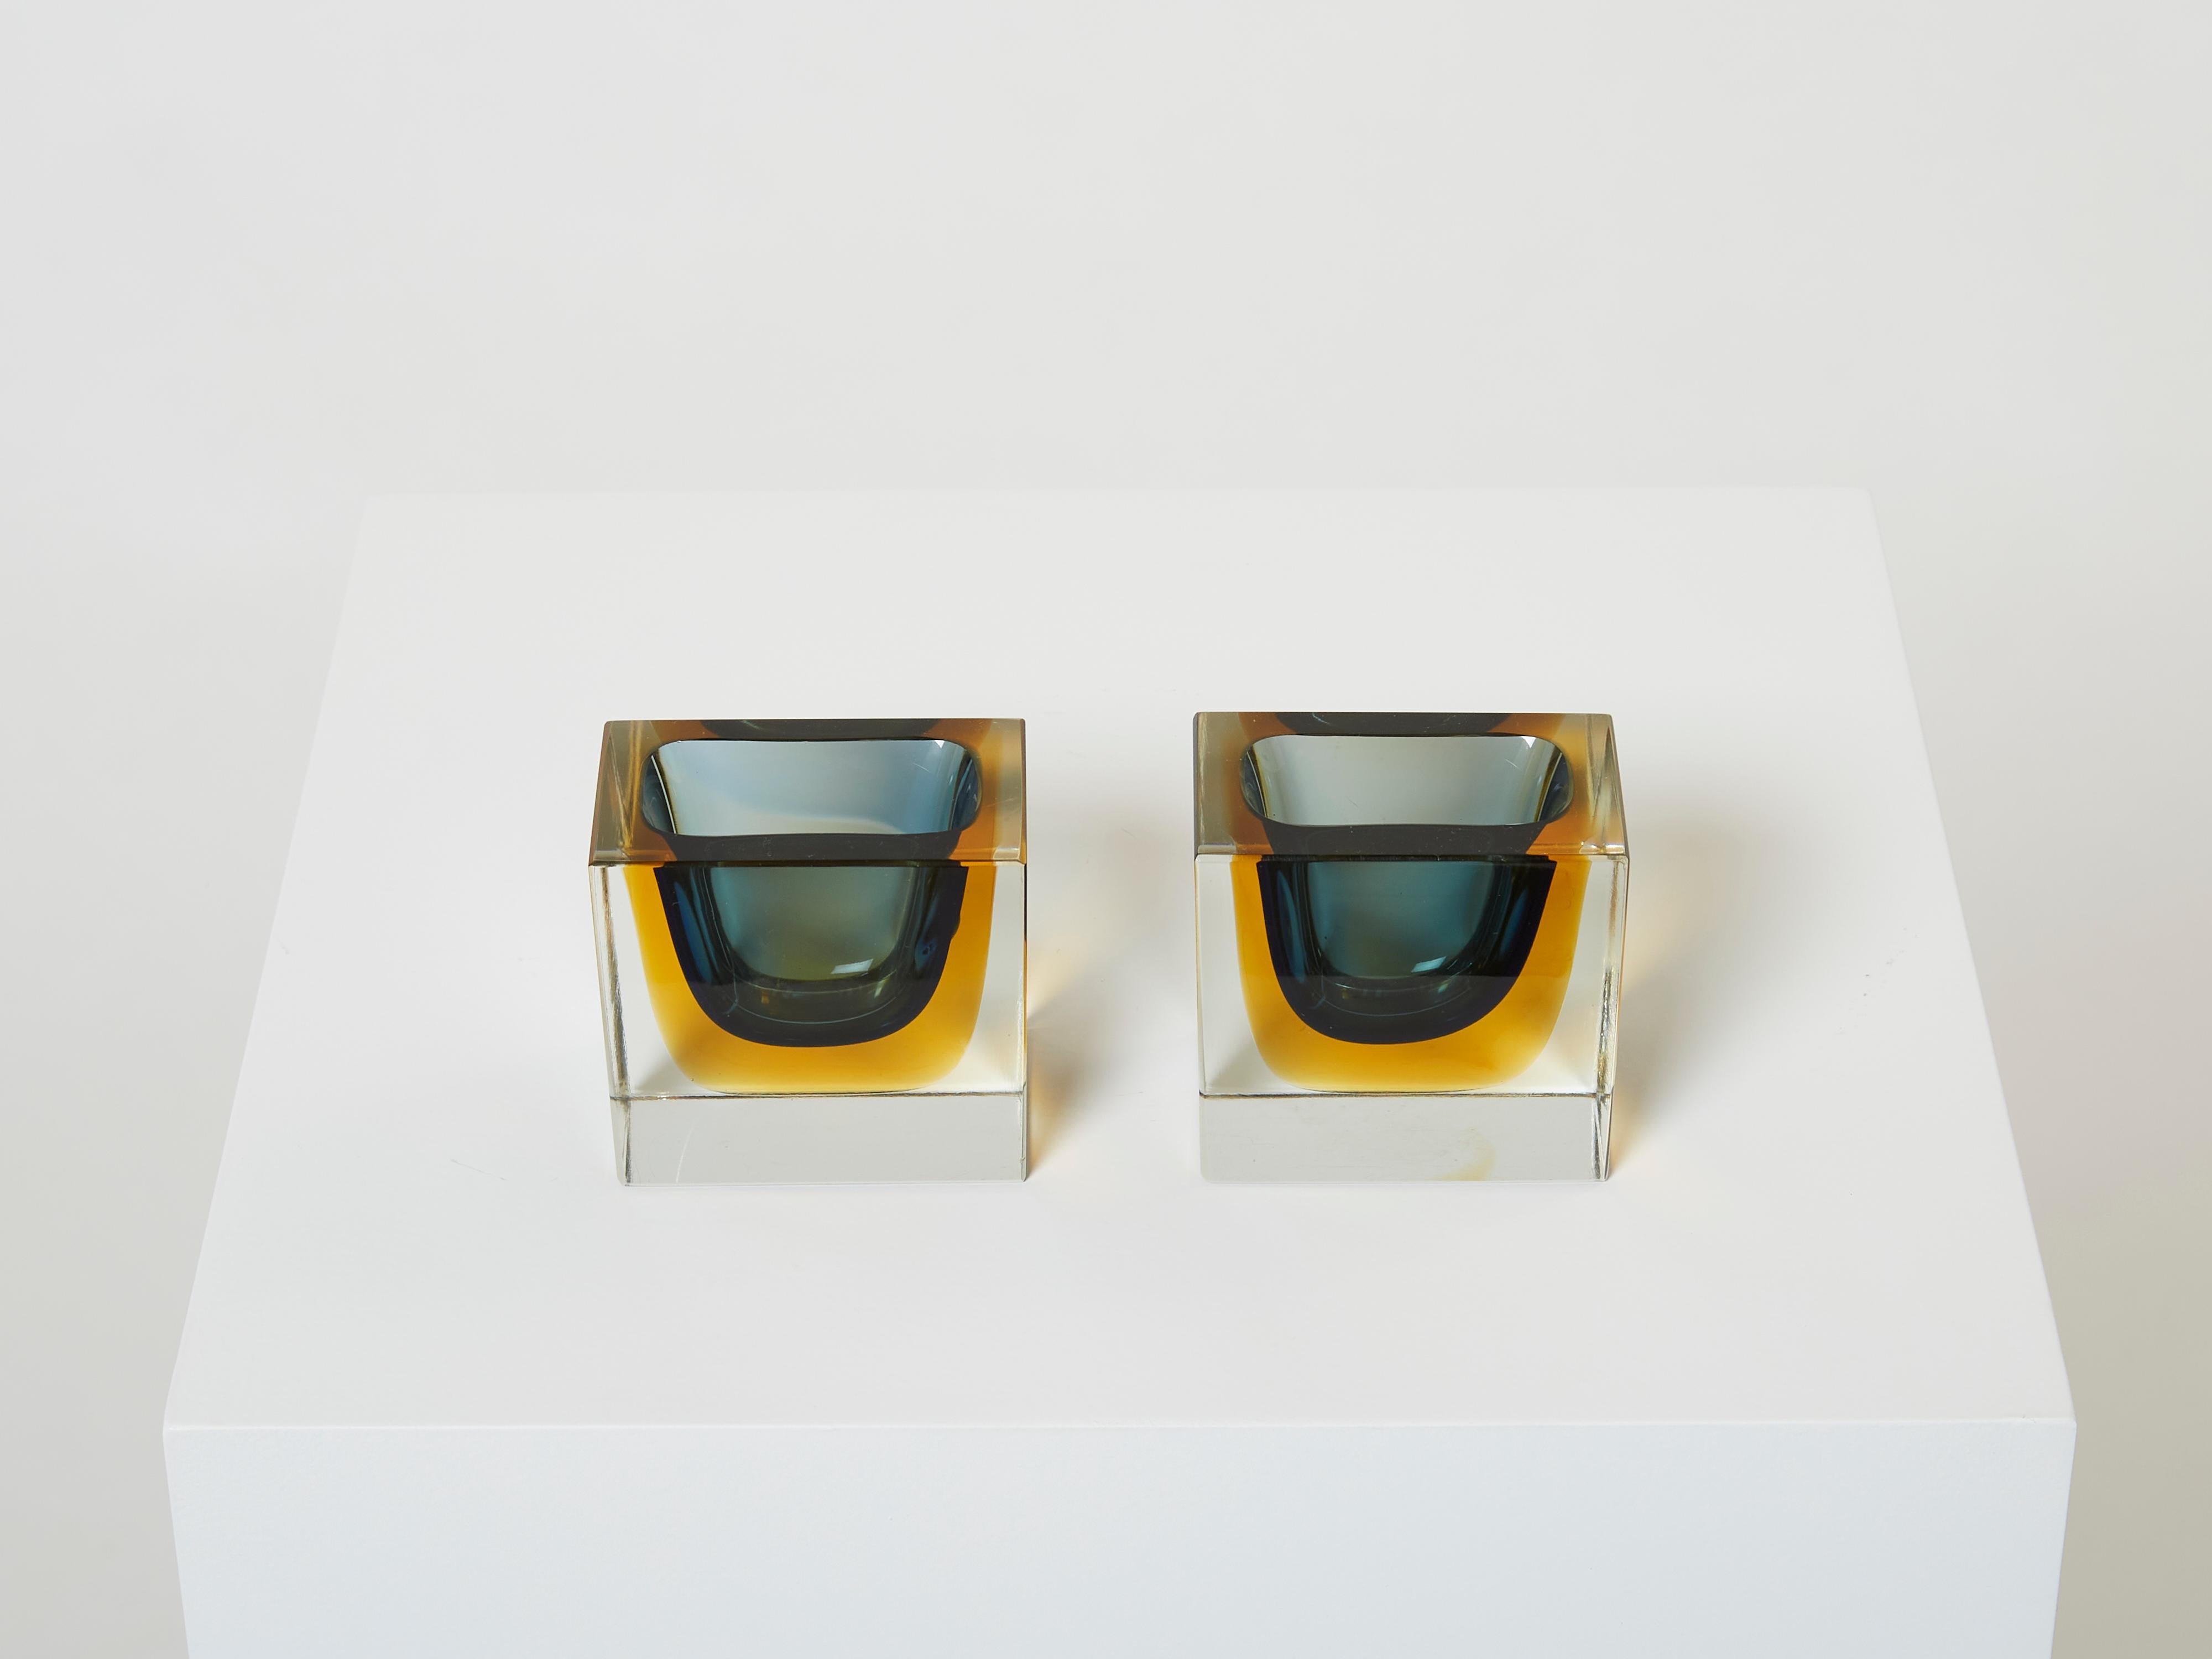 Beautiful pair of Flavio Poli small bowls or catch-all for Seguso Vetri D'Arte made in the 1960s from the Sommerso collection. These block bowls have eye-catching colors, with petrol blue glass submerged into yellow glass, finished with clear glass.